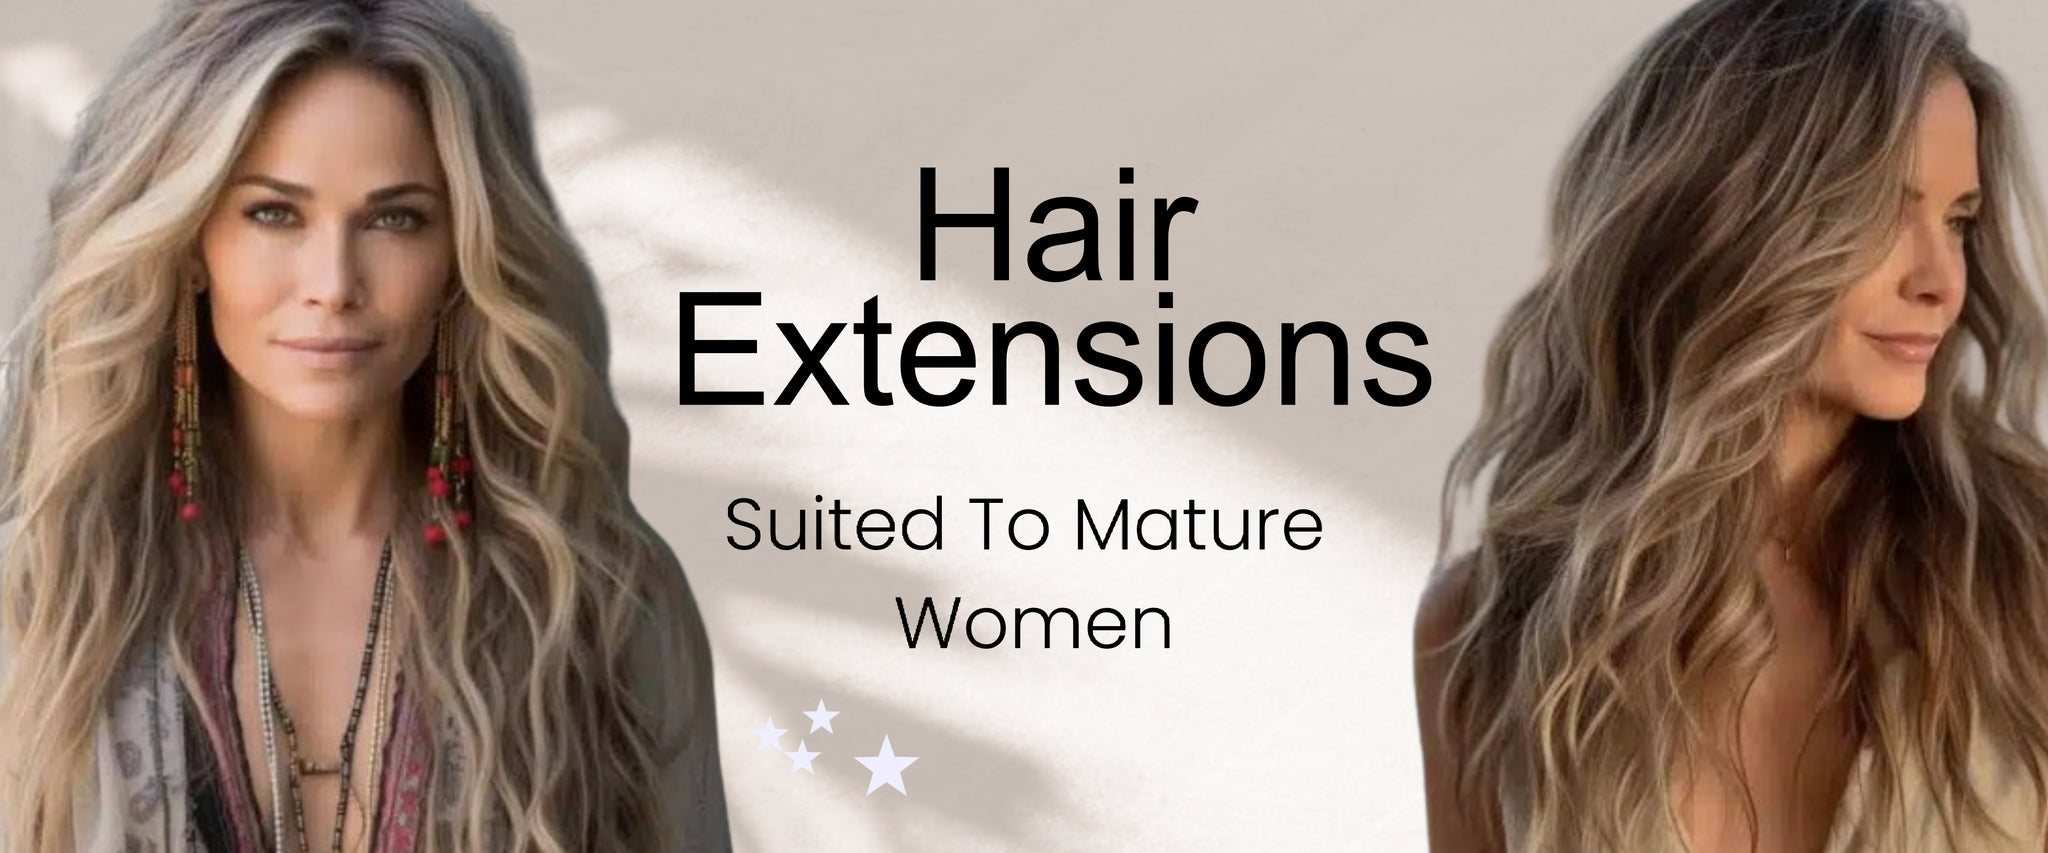 hair extensions for mature women